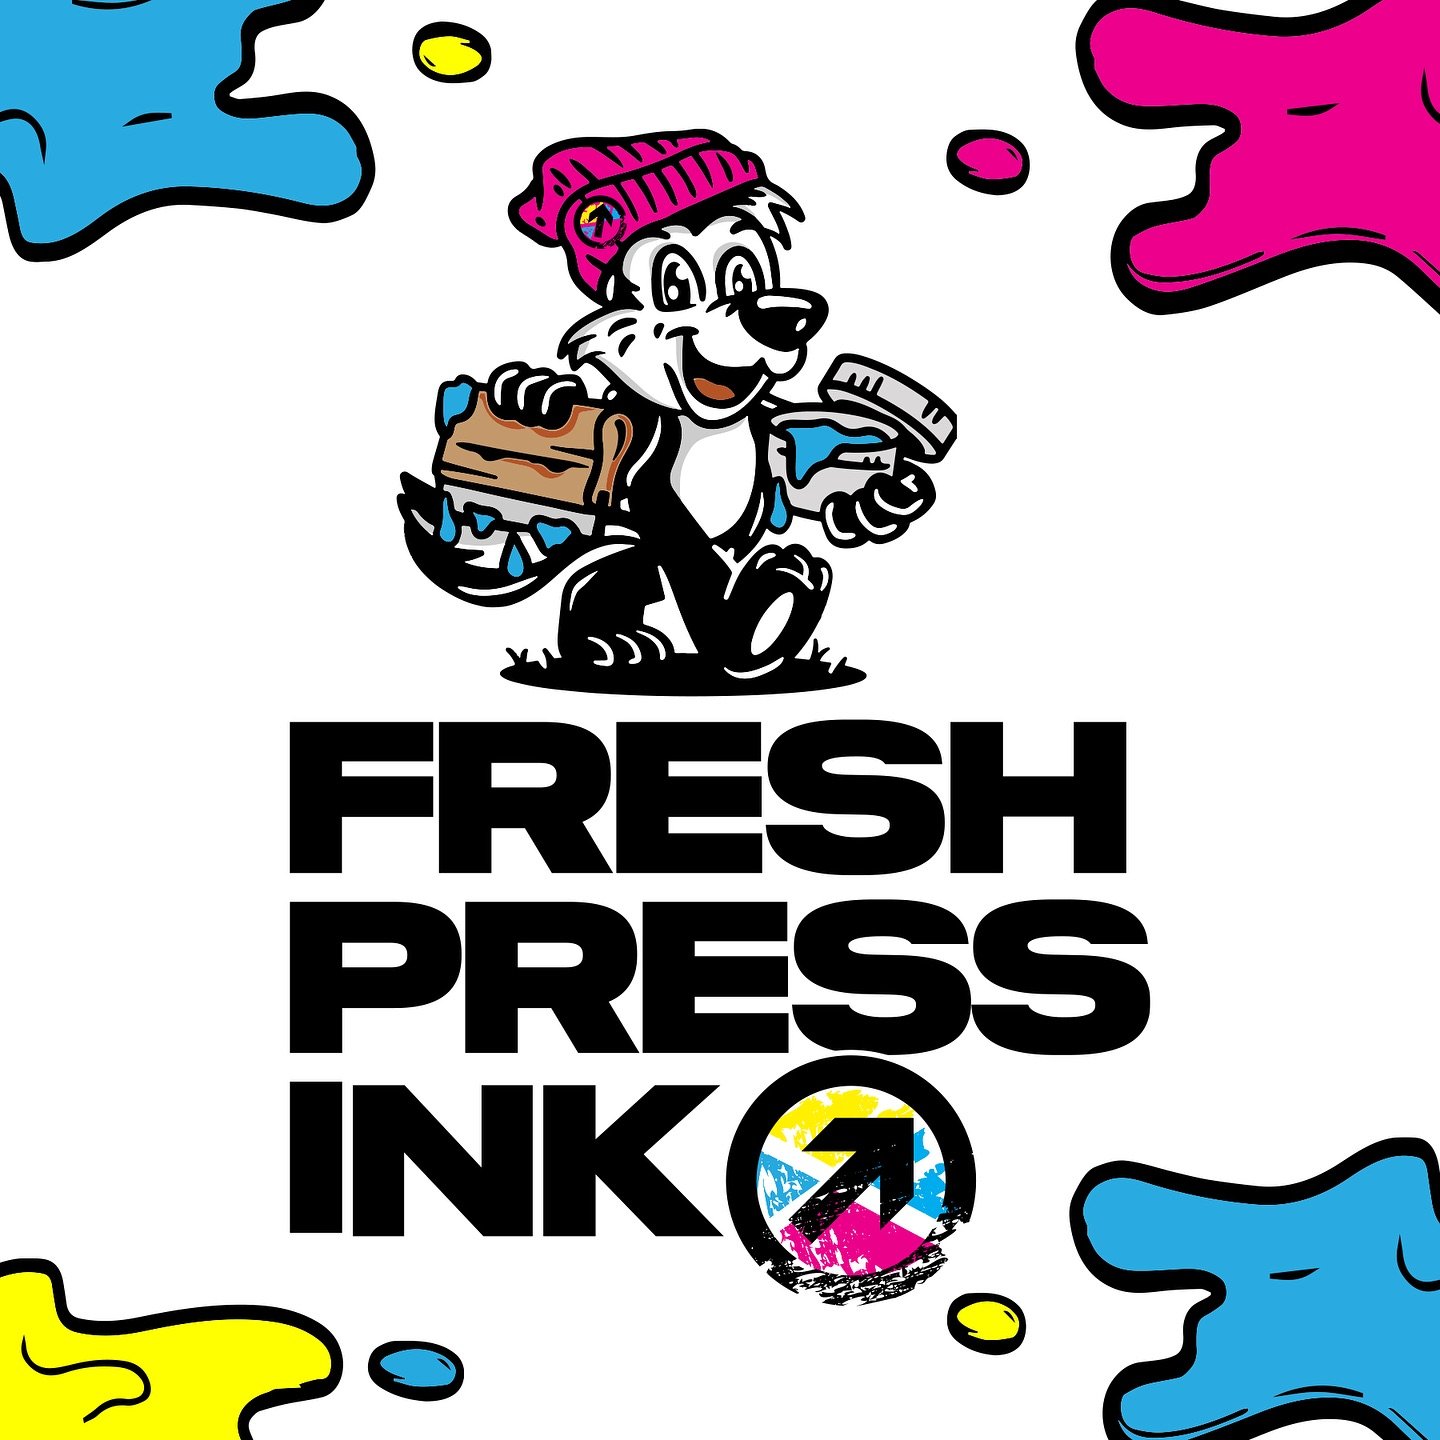 Fresh Press Ink | Roseville Ca. 📍 

How do you like our new logo? 
It&rsquo;s a new year and we are stoked for change! Be on the look out for upcoming promotions for the month of February. 🤙🏽

#freshpressink 
#tshirtprinting
#roseville
#promotiona